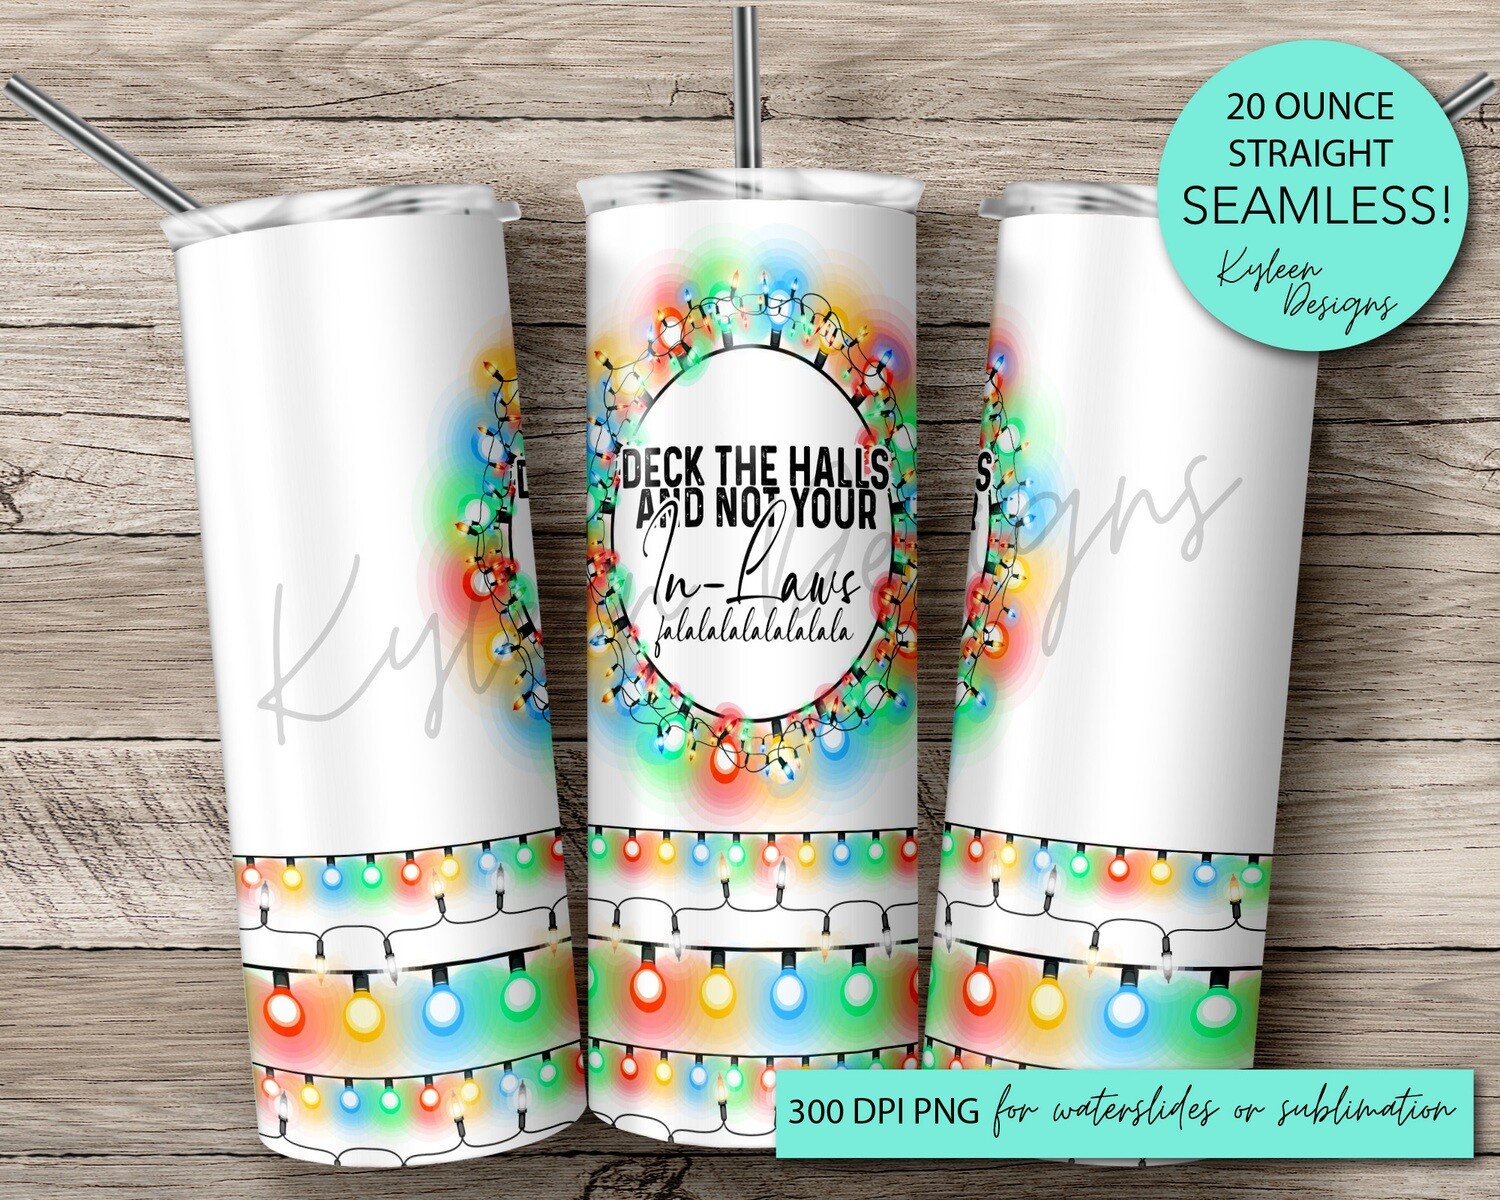 20 ounce DECK THE HALLS AND NOT YOUR IN-LAWS wrap for sublimation, waterslide High res PNG digital file